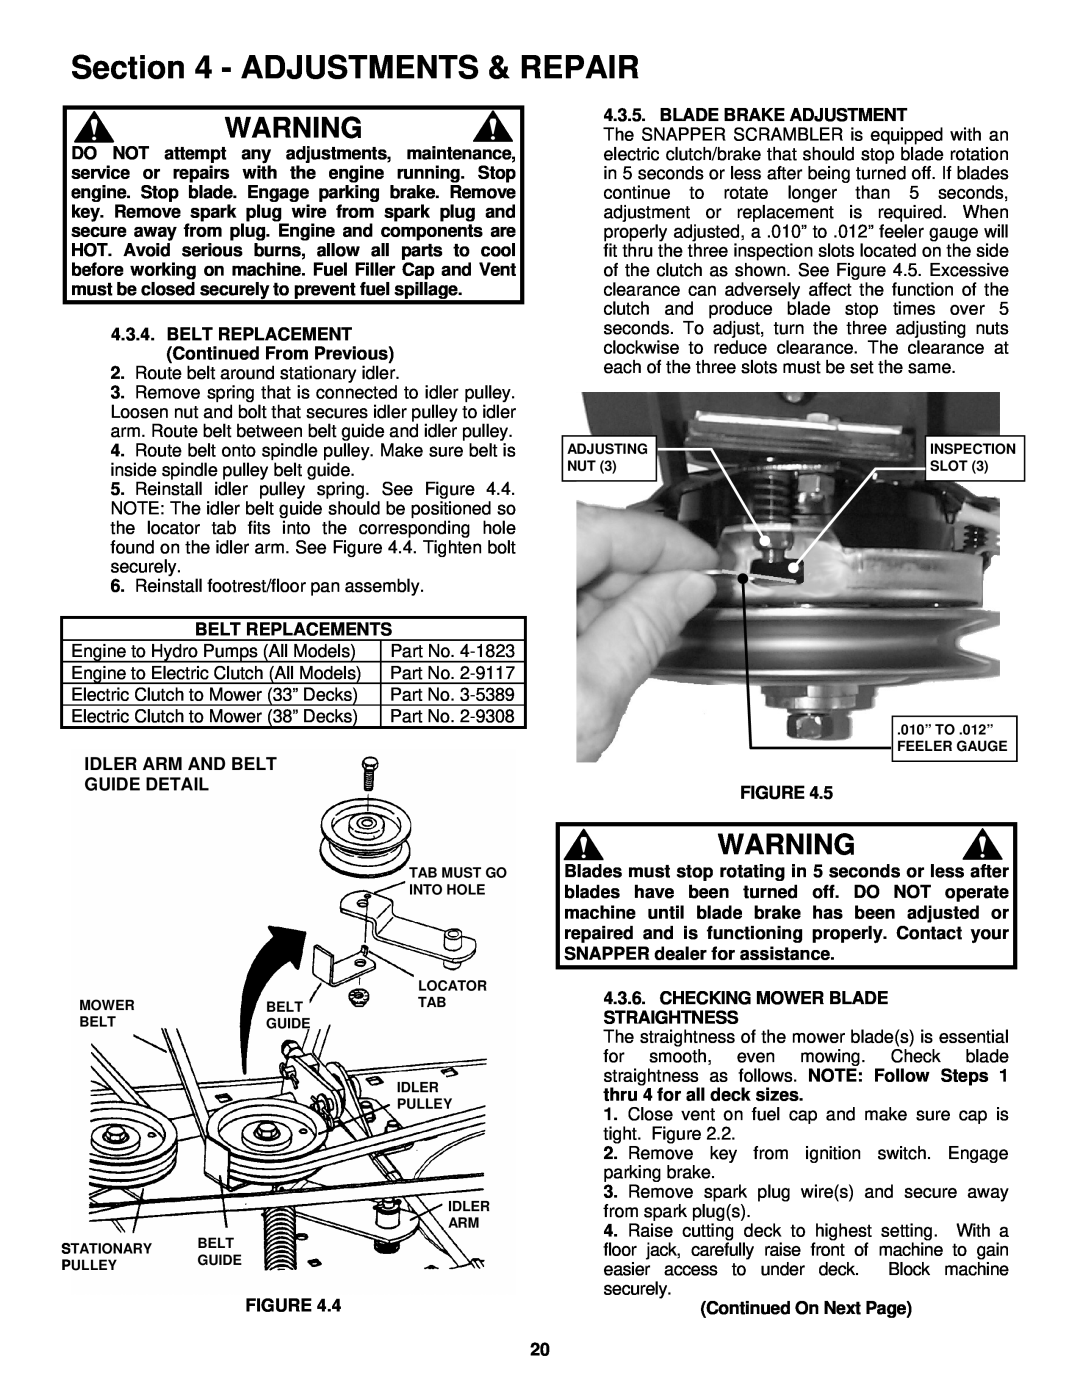 Snapper ESZT18336BVE important safety instructions Adjustments & Repair, Route belt around stationary idler 